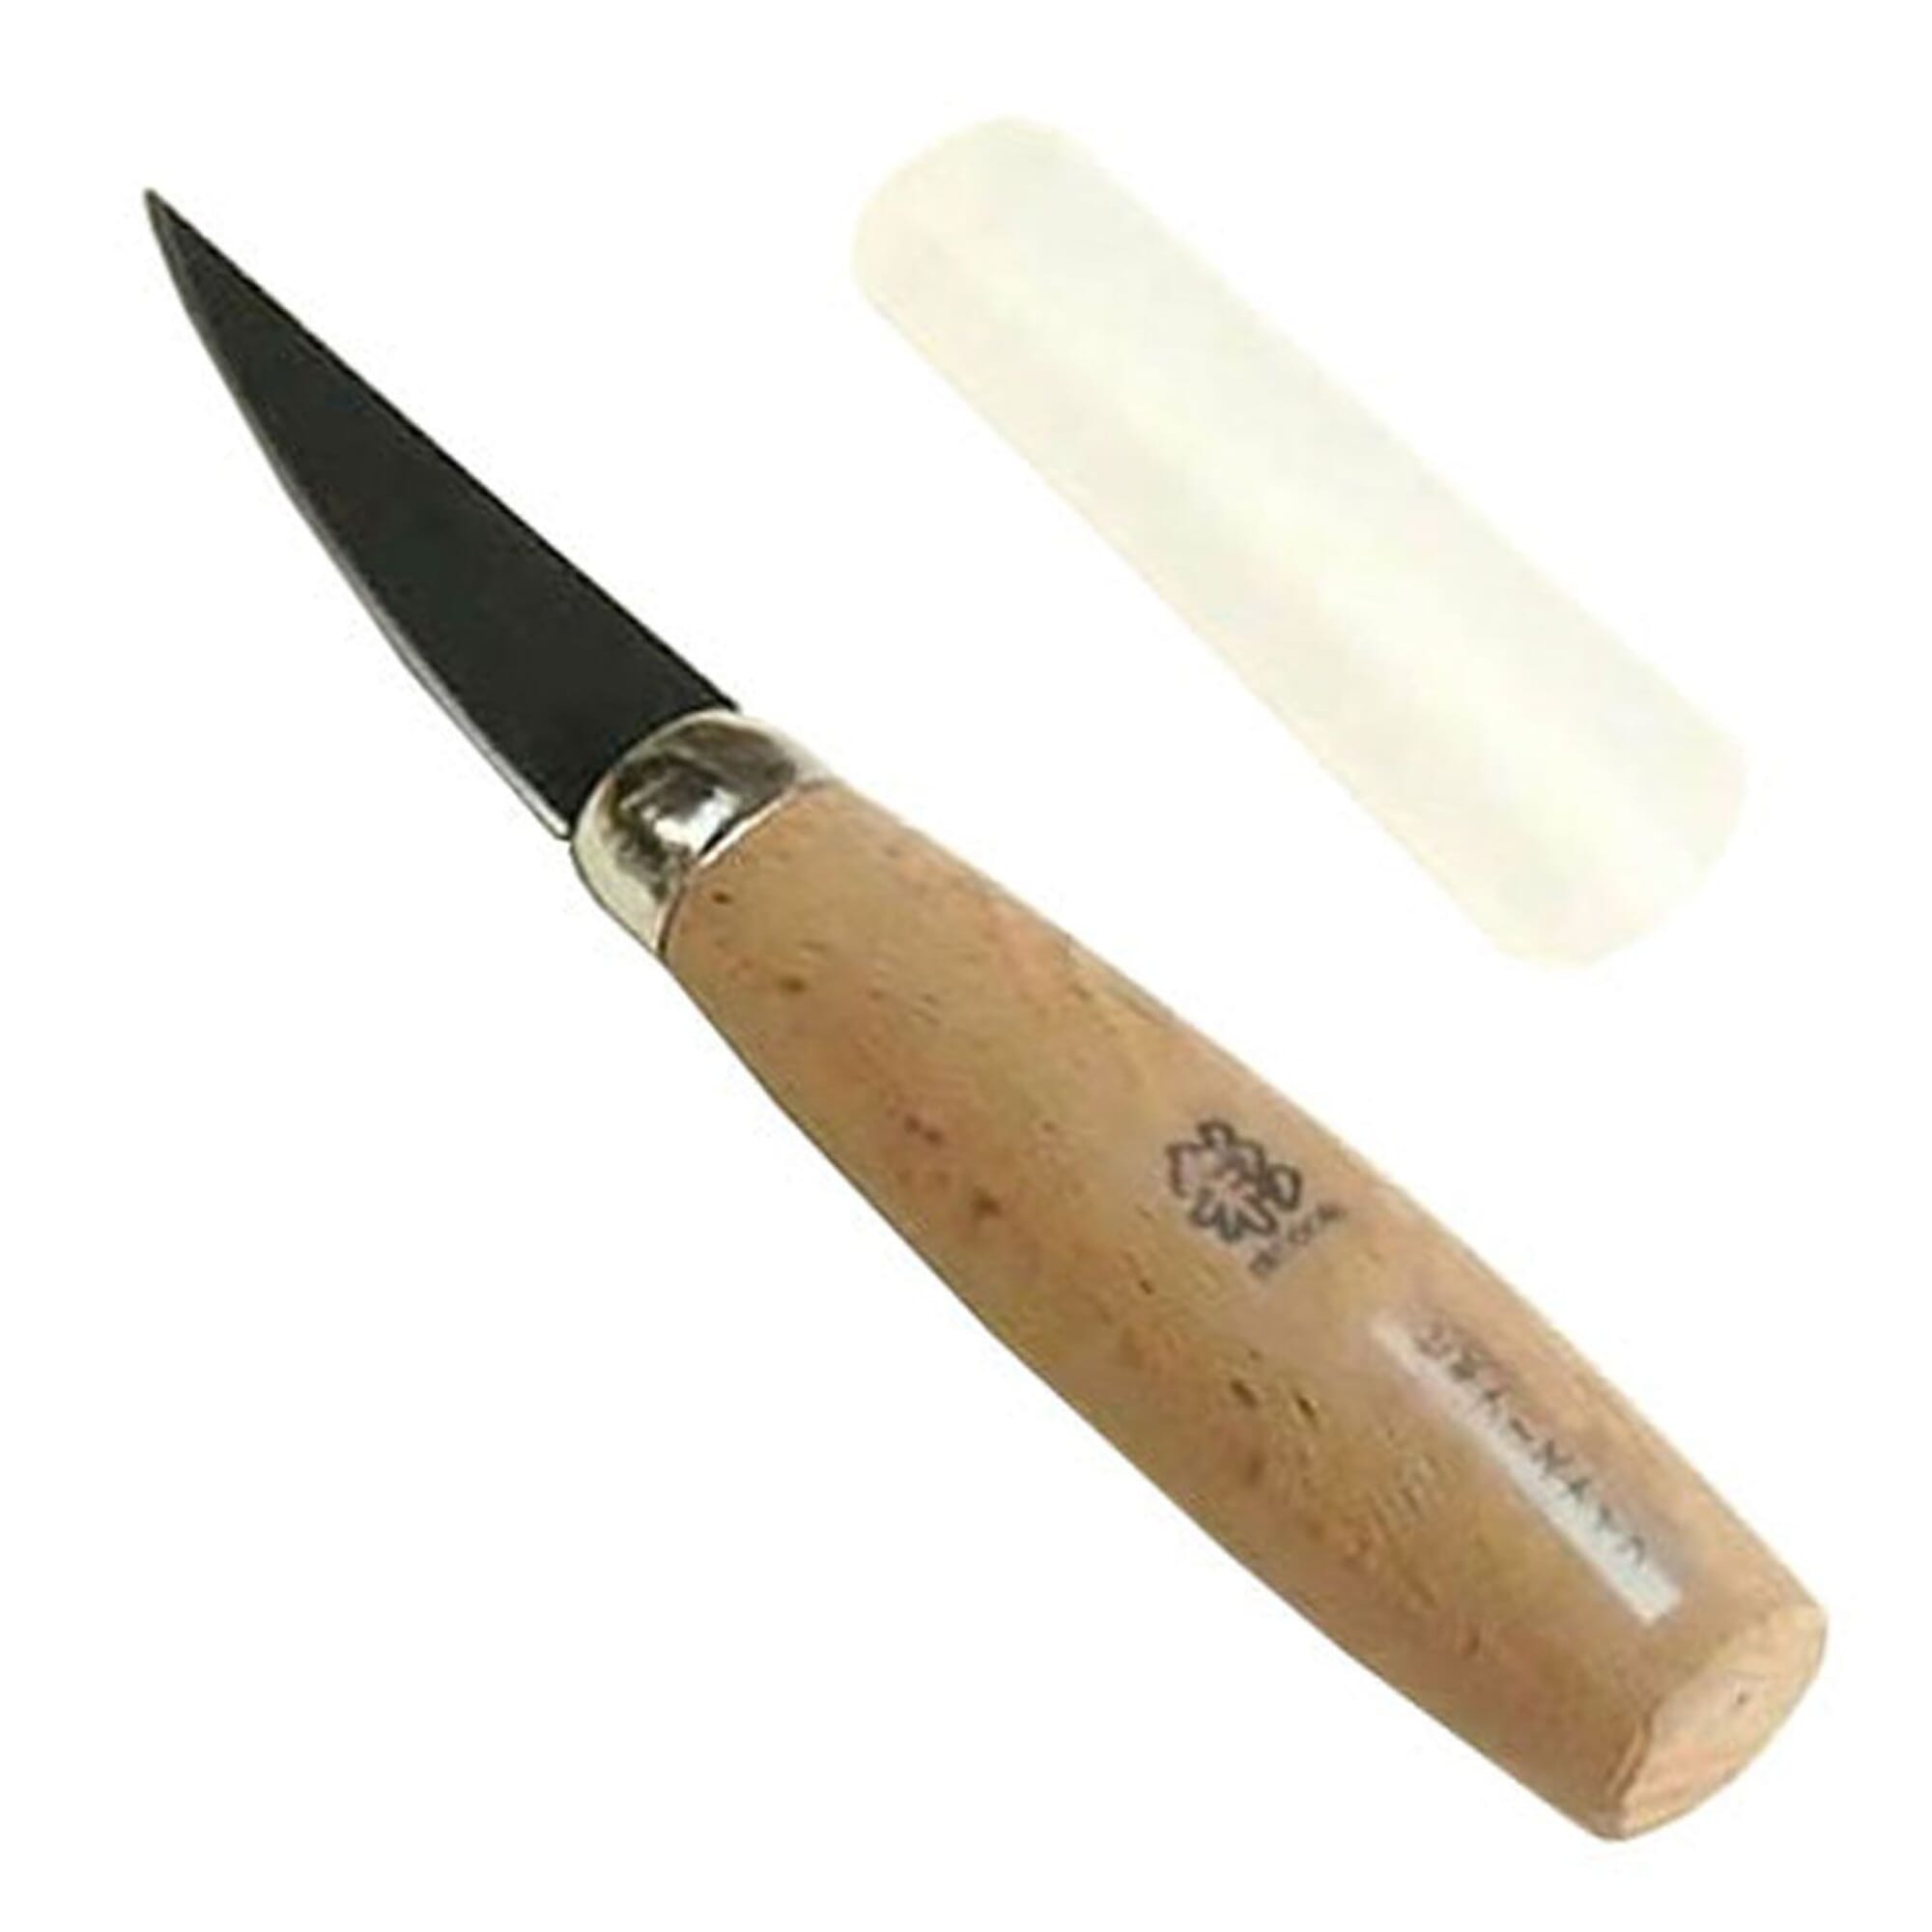 Michihamono Wood Carving Tool Double Edged Wood Whittling Knife 60mm, with Blade Cap & Zelkova Wood Handle, for Woodworking